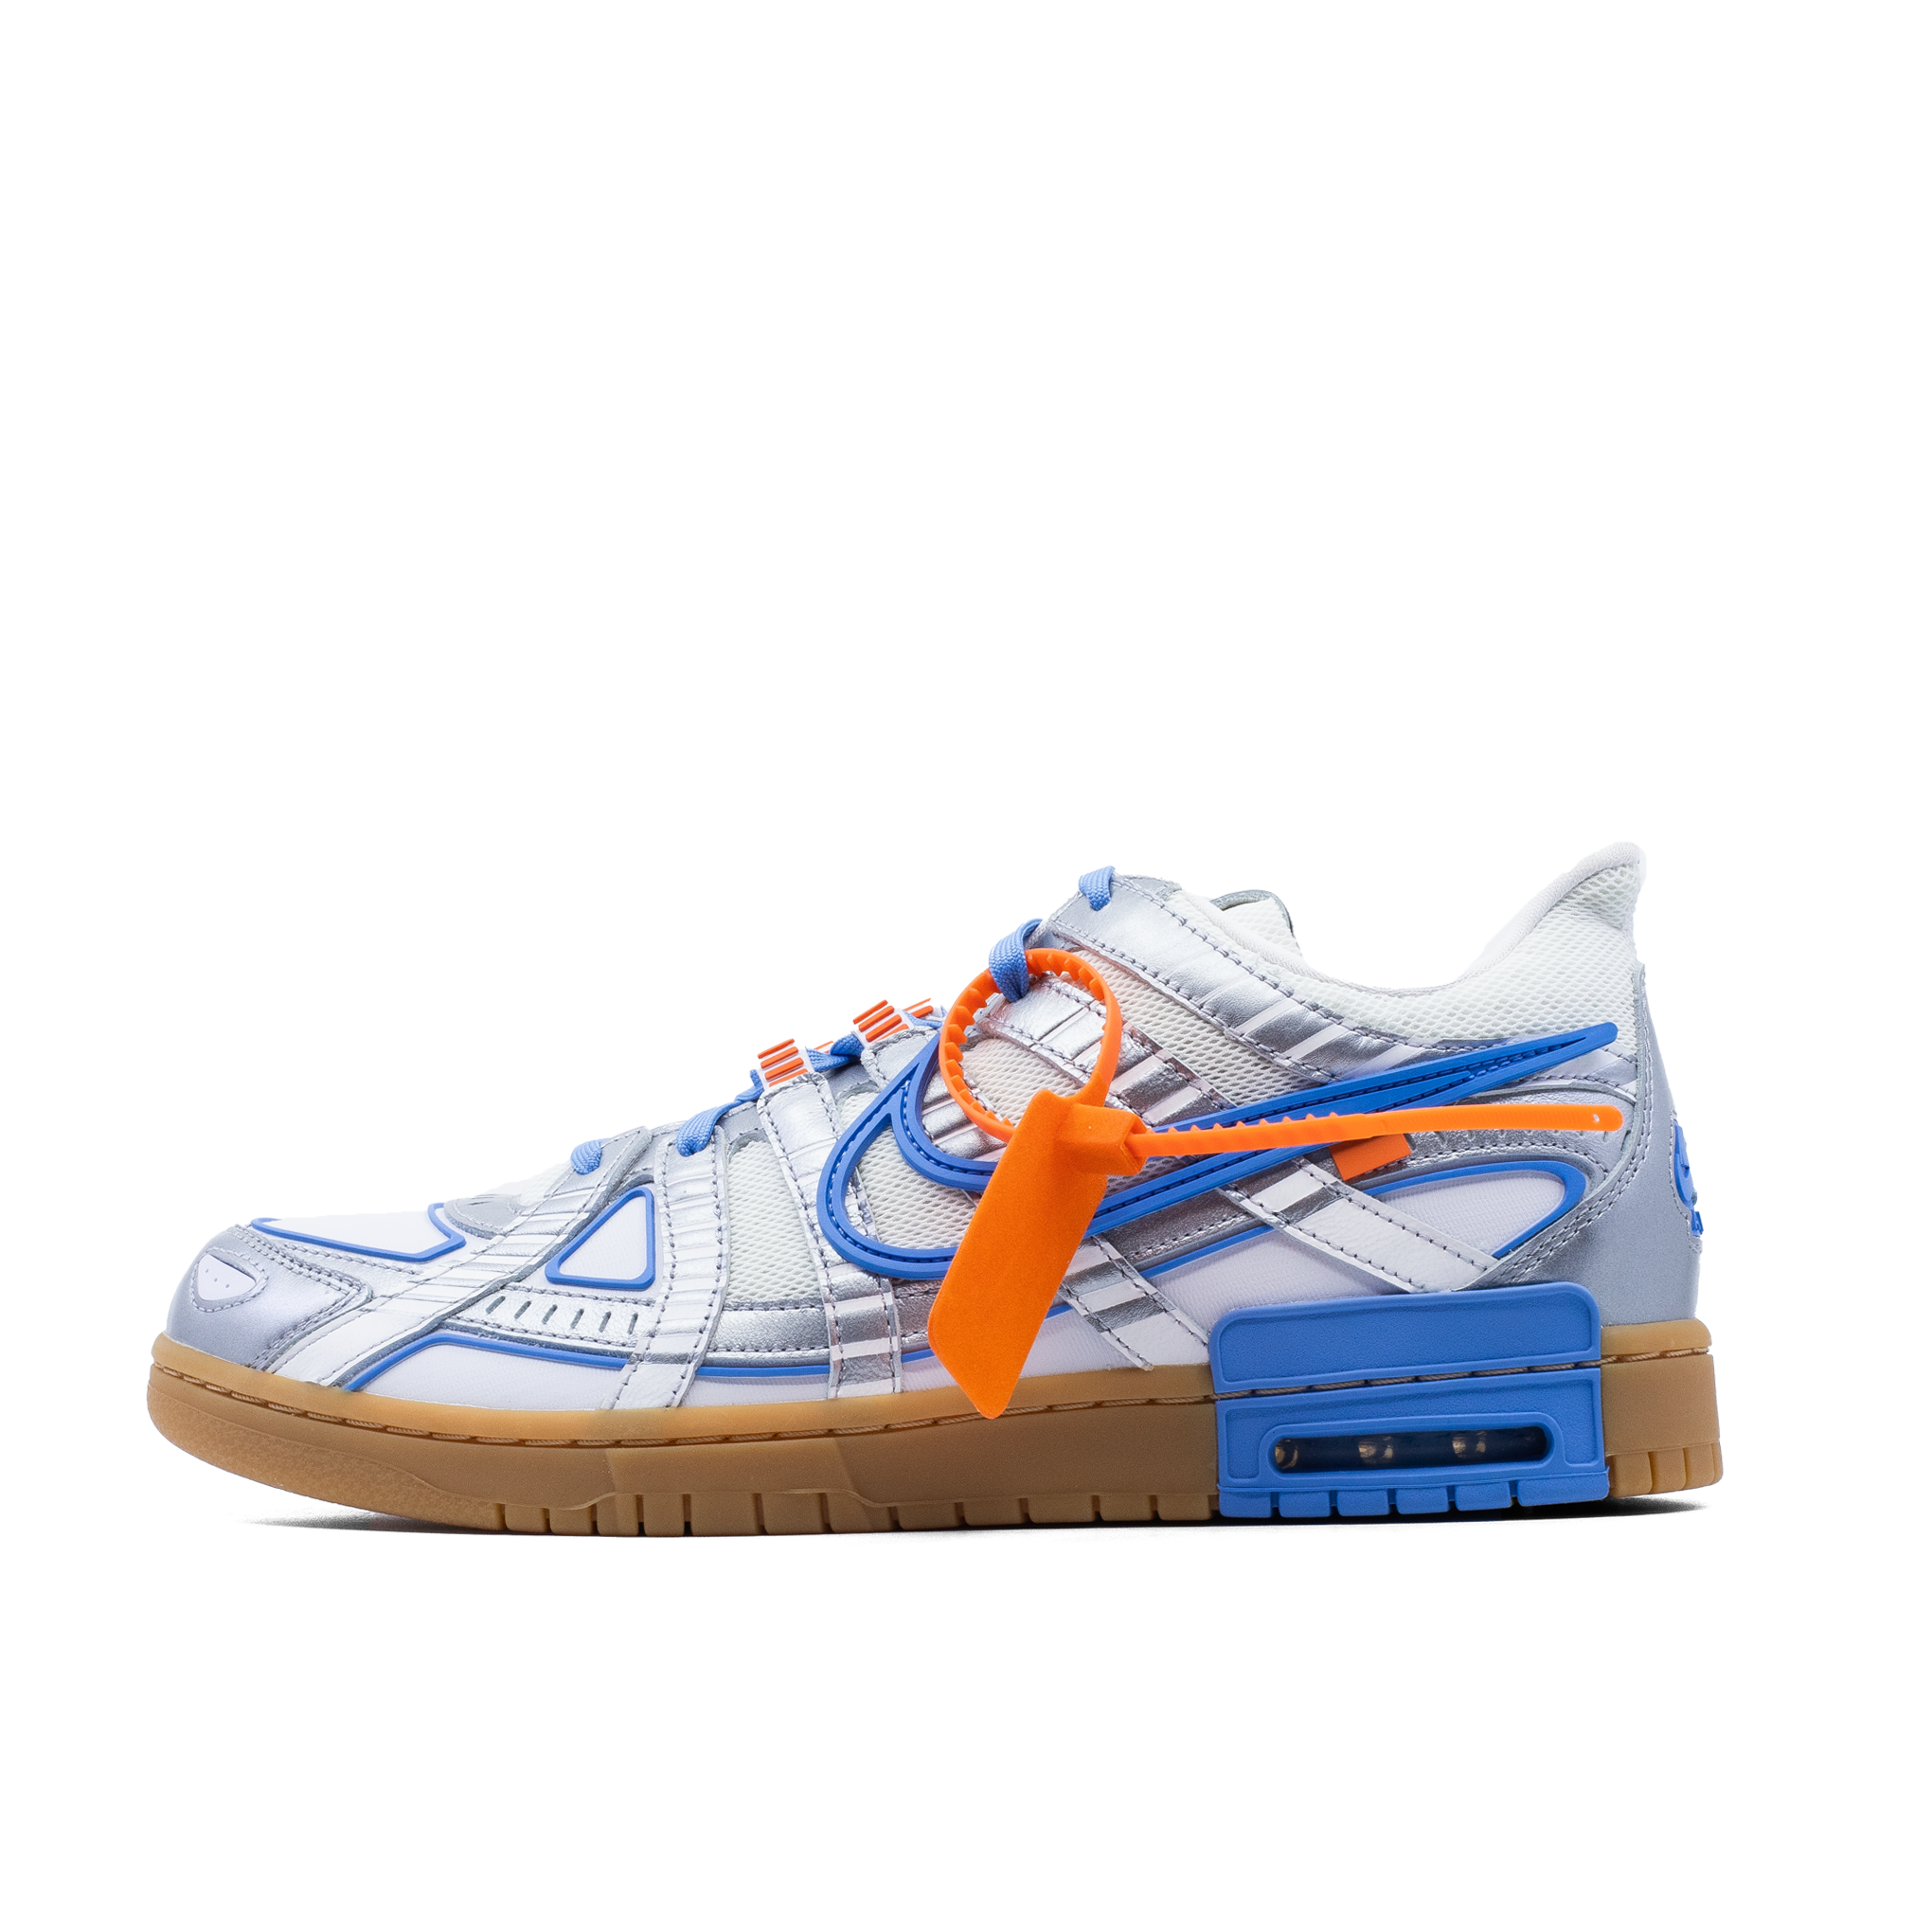 NIKE AIR RUBBER DUNK OFF-WHITE UNC